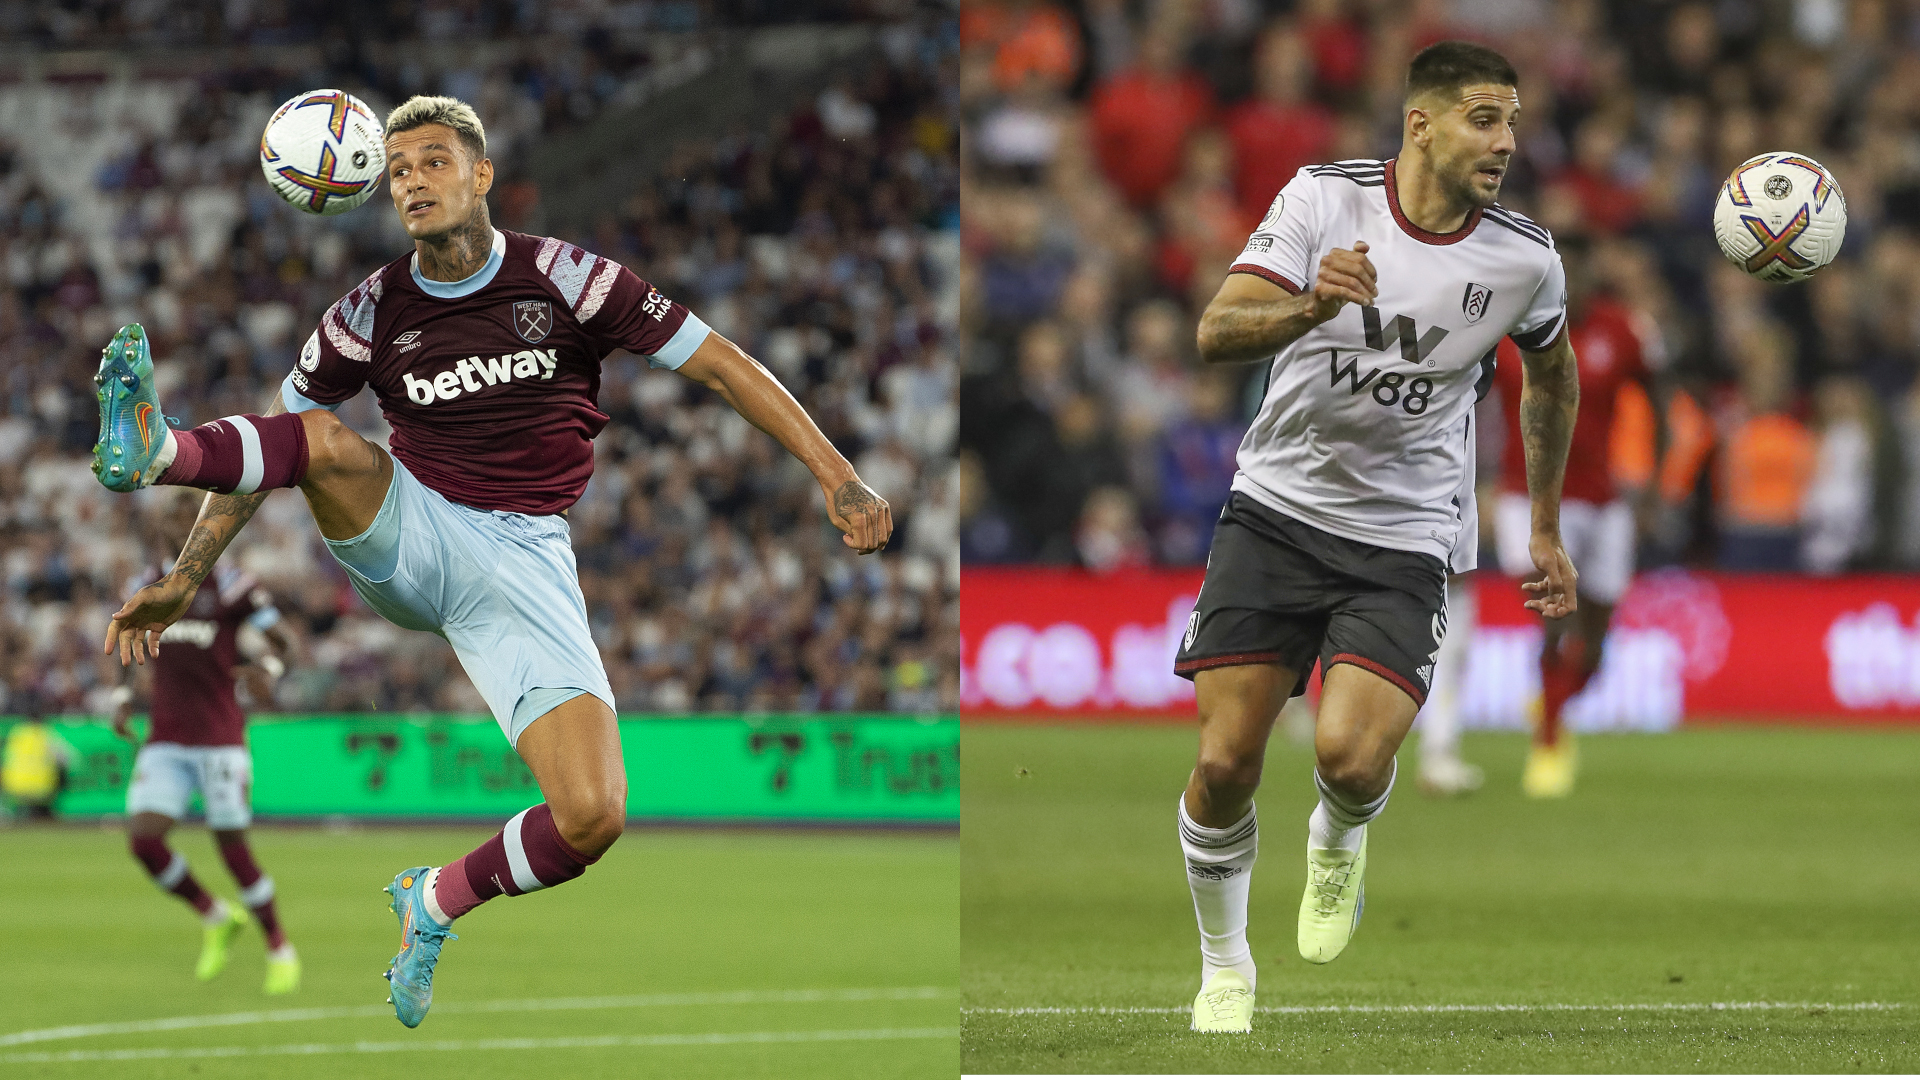 West Ham Vs Fulham Live Stream How To Watch The Premier League Online And On Tv From Anywhere